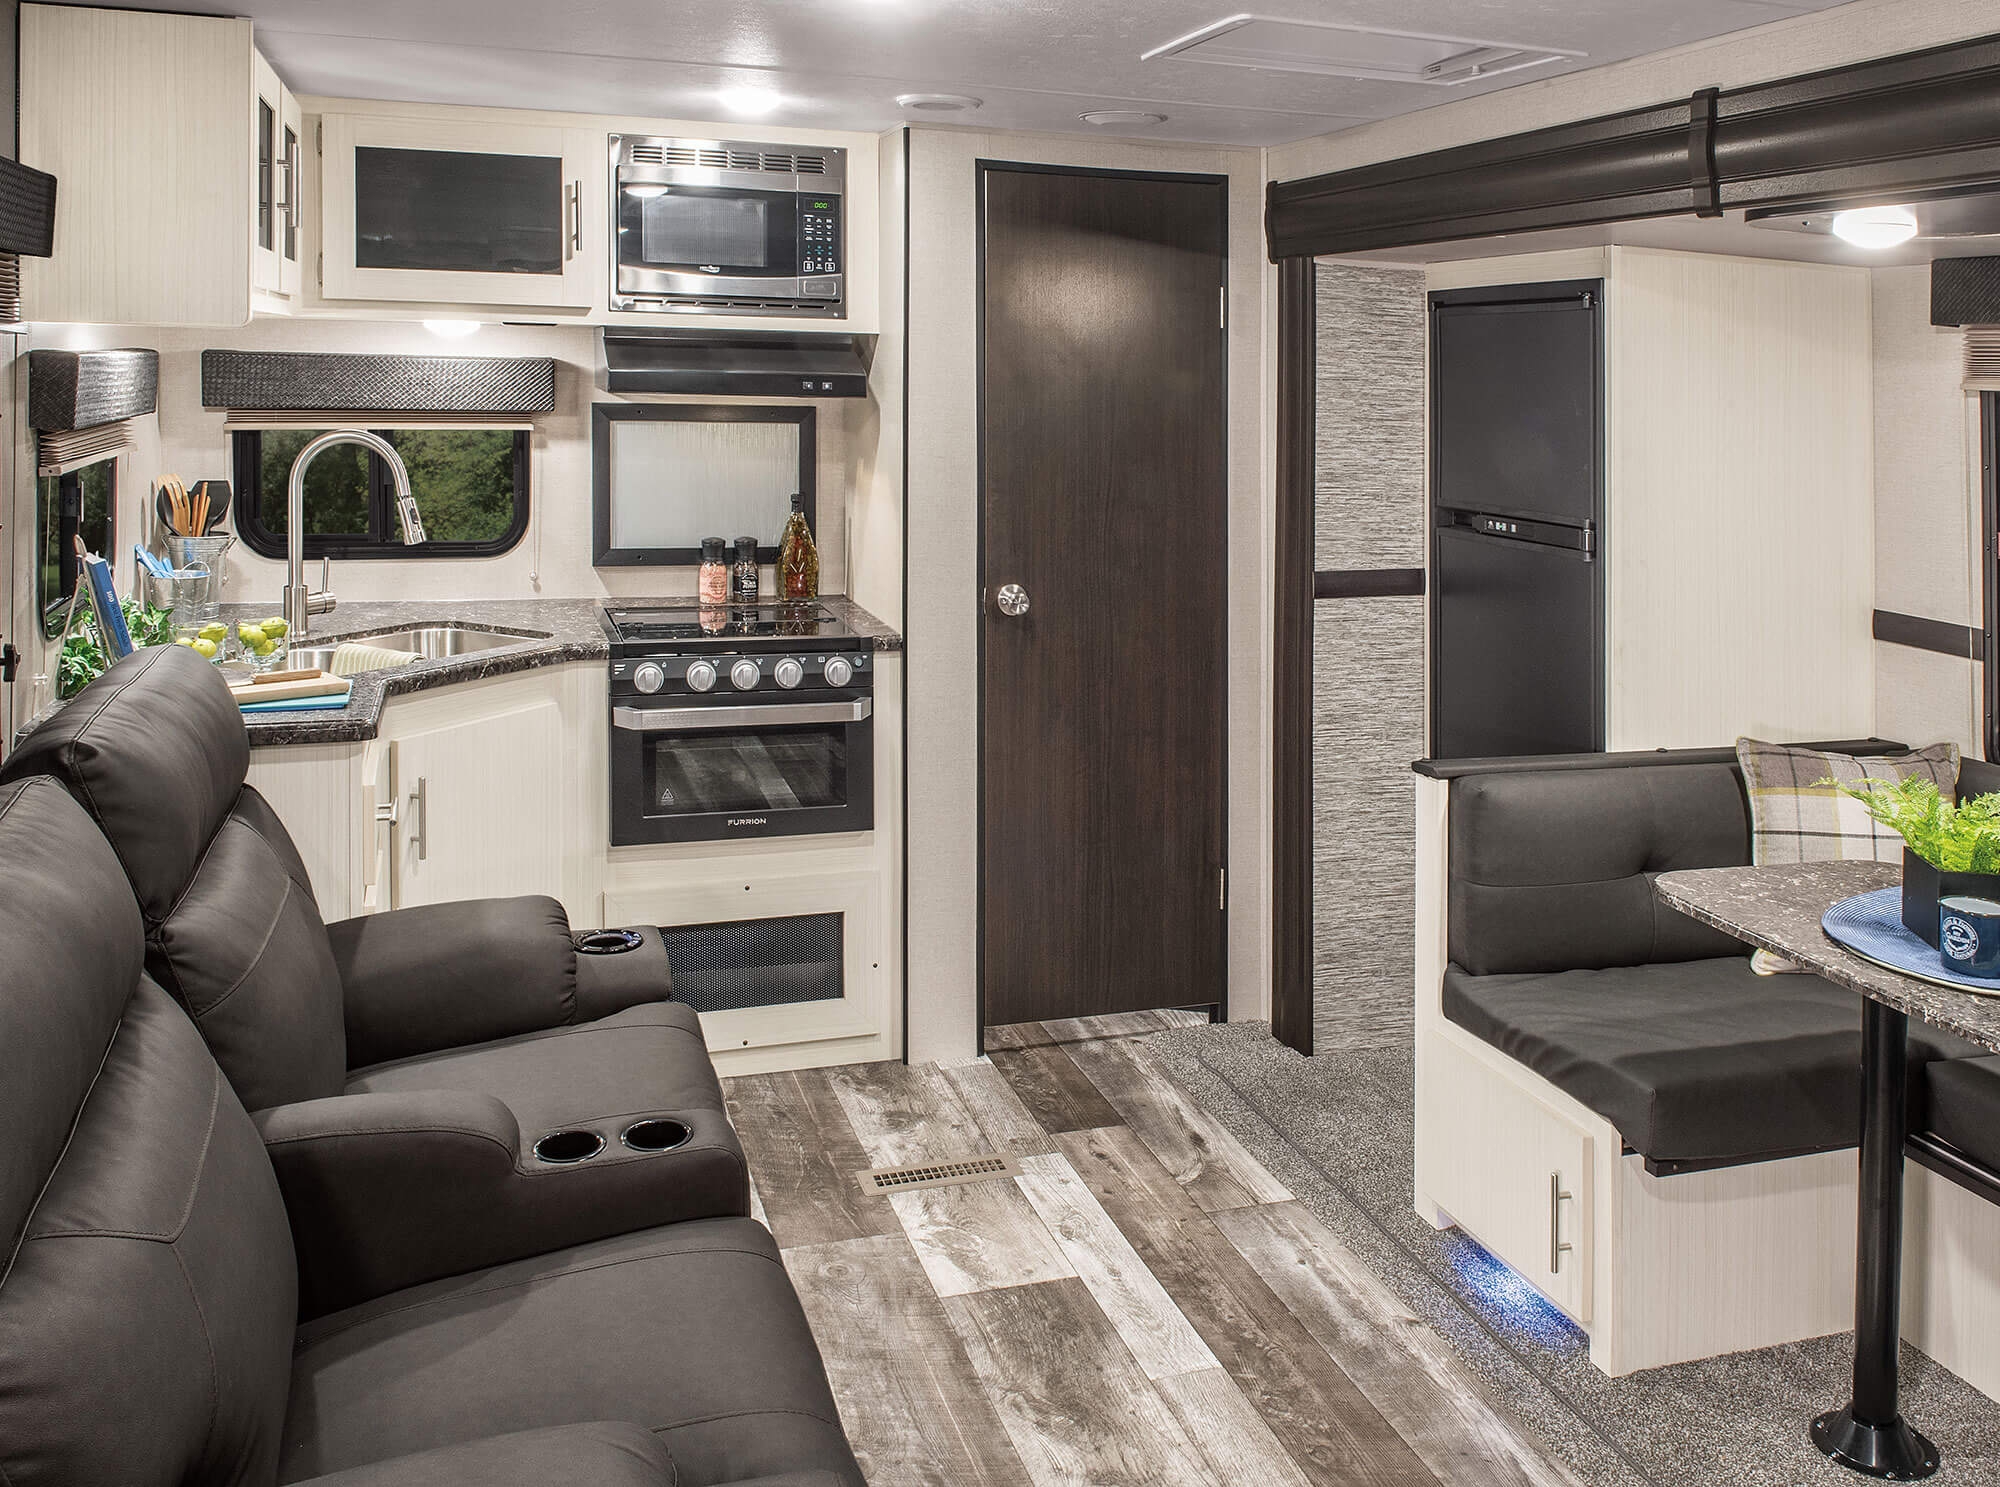 2019 Best In Show RV News Says Its The Venture Stratus SR261VRK   